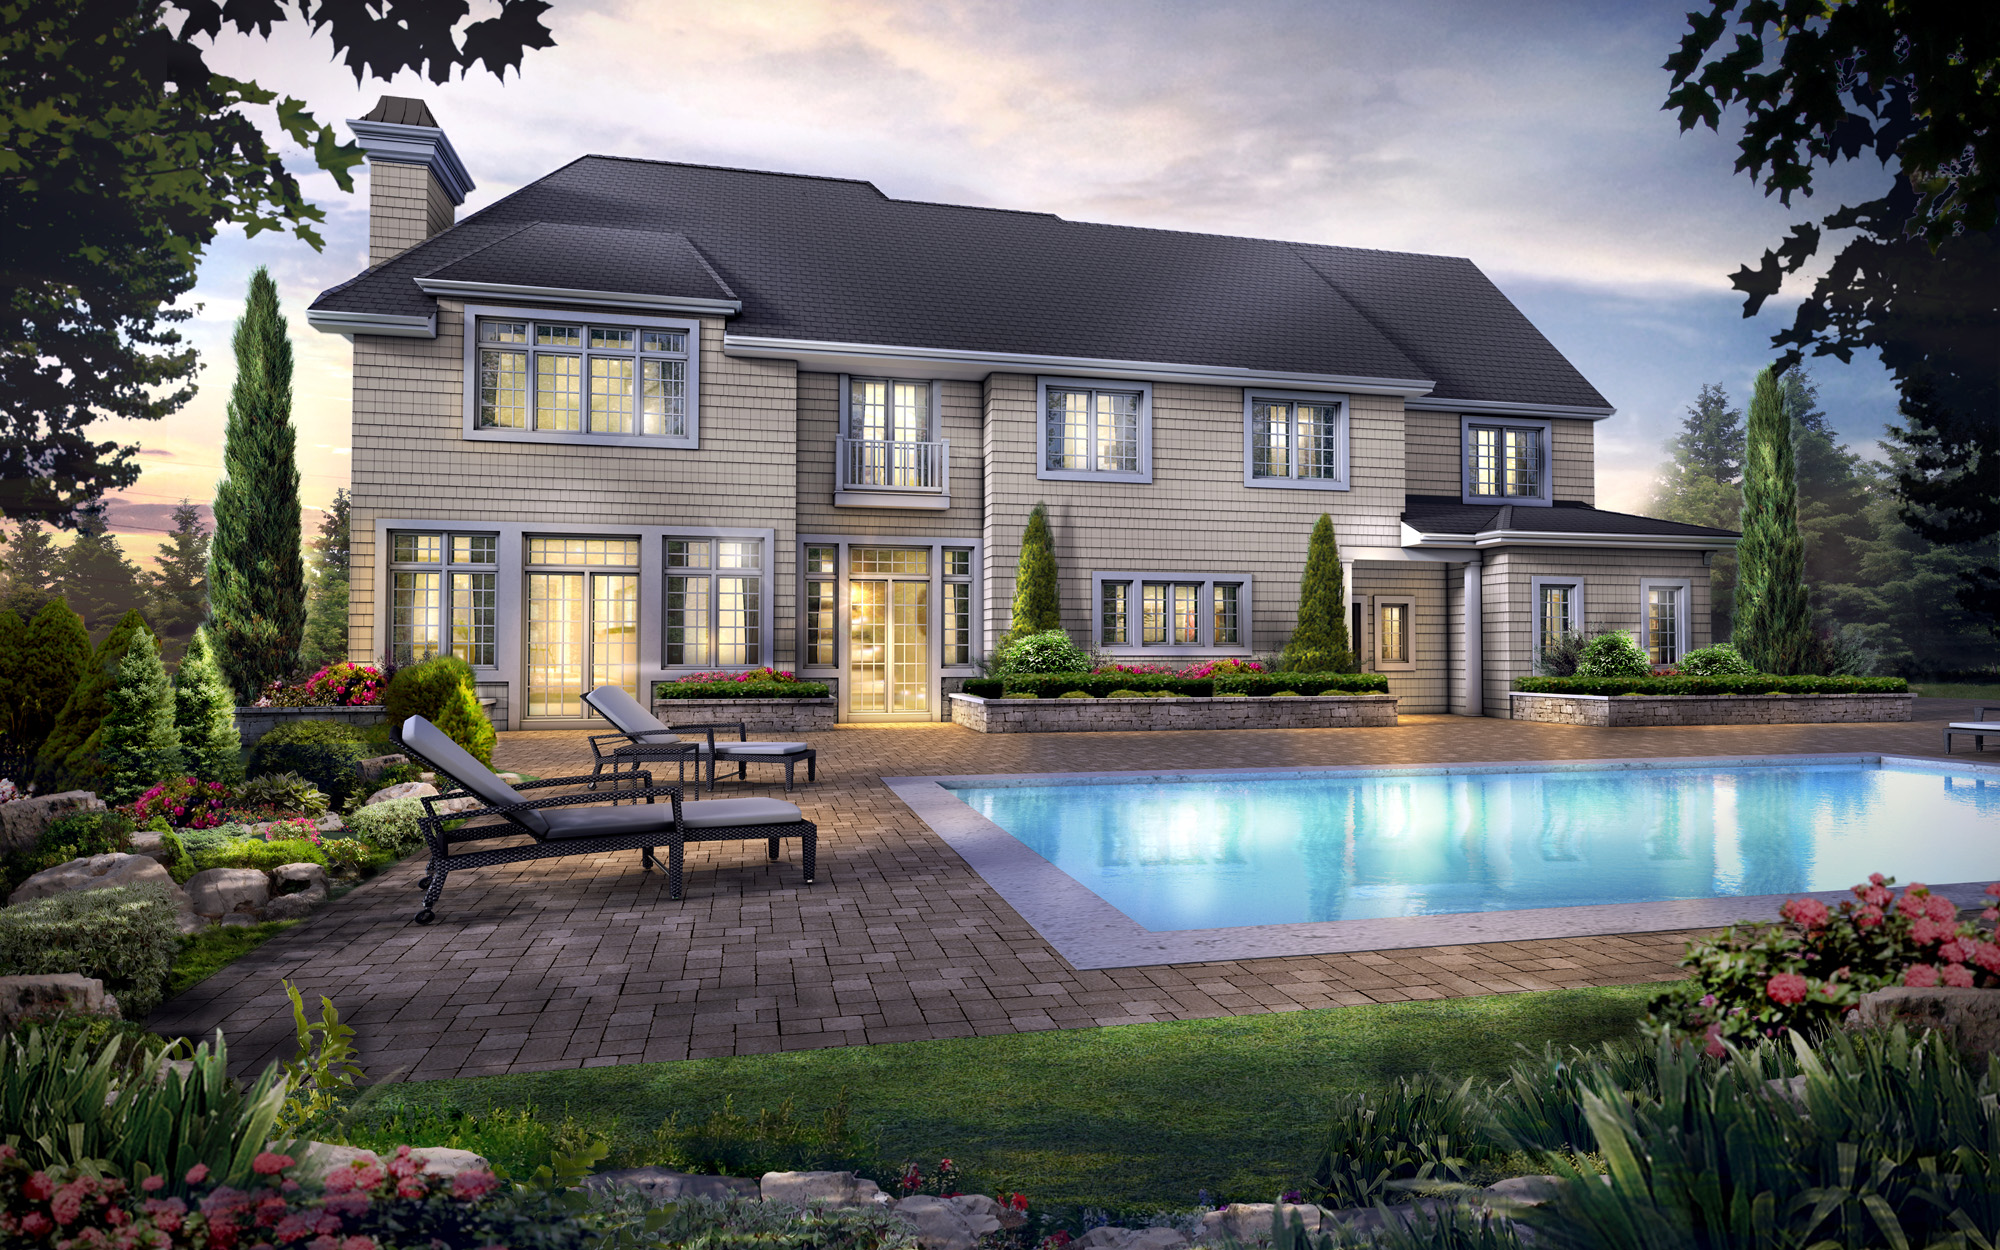 Exterior Rendering - Single Family House - 3D Rendering of Home with Backyard Outdoor Pool